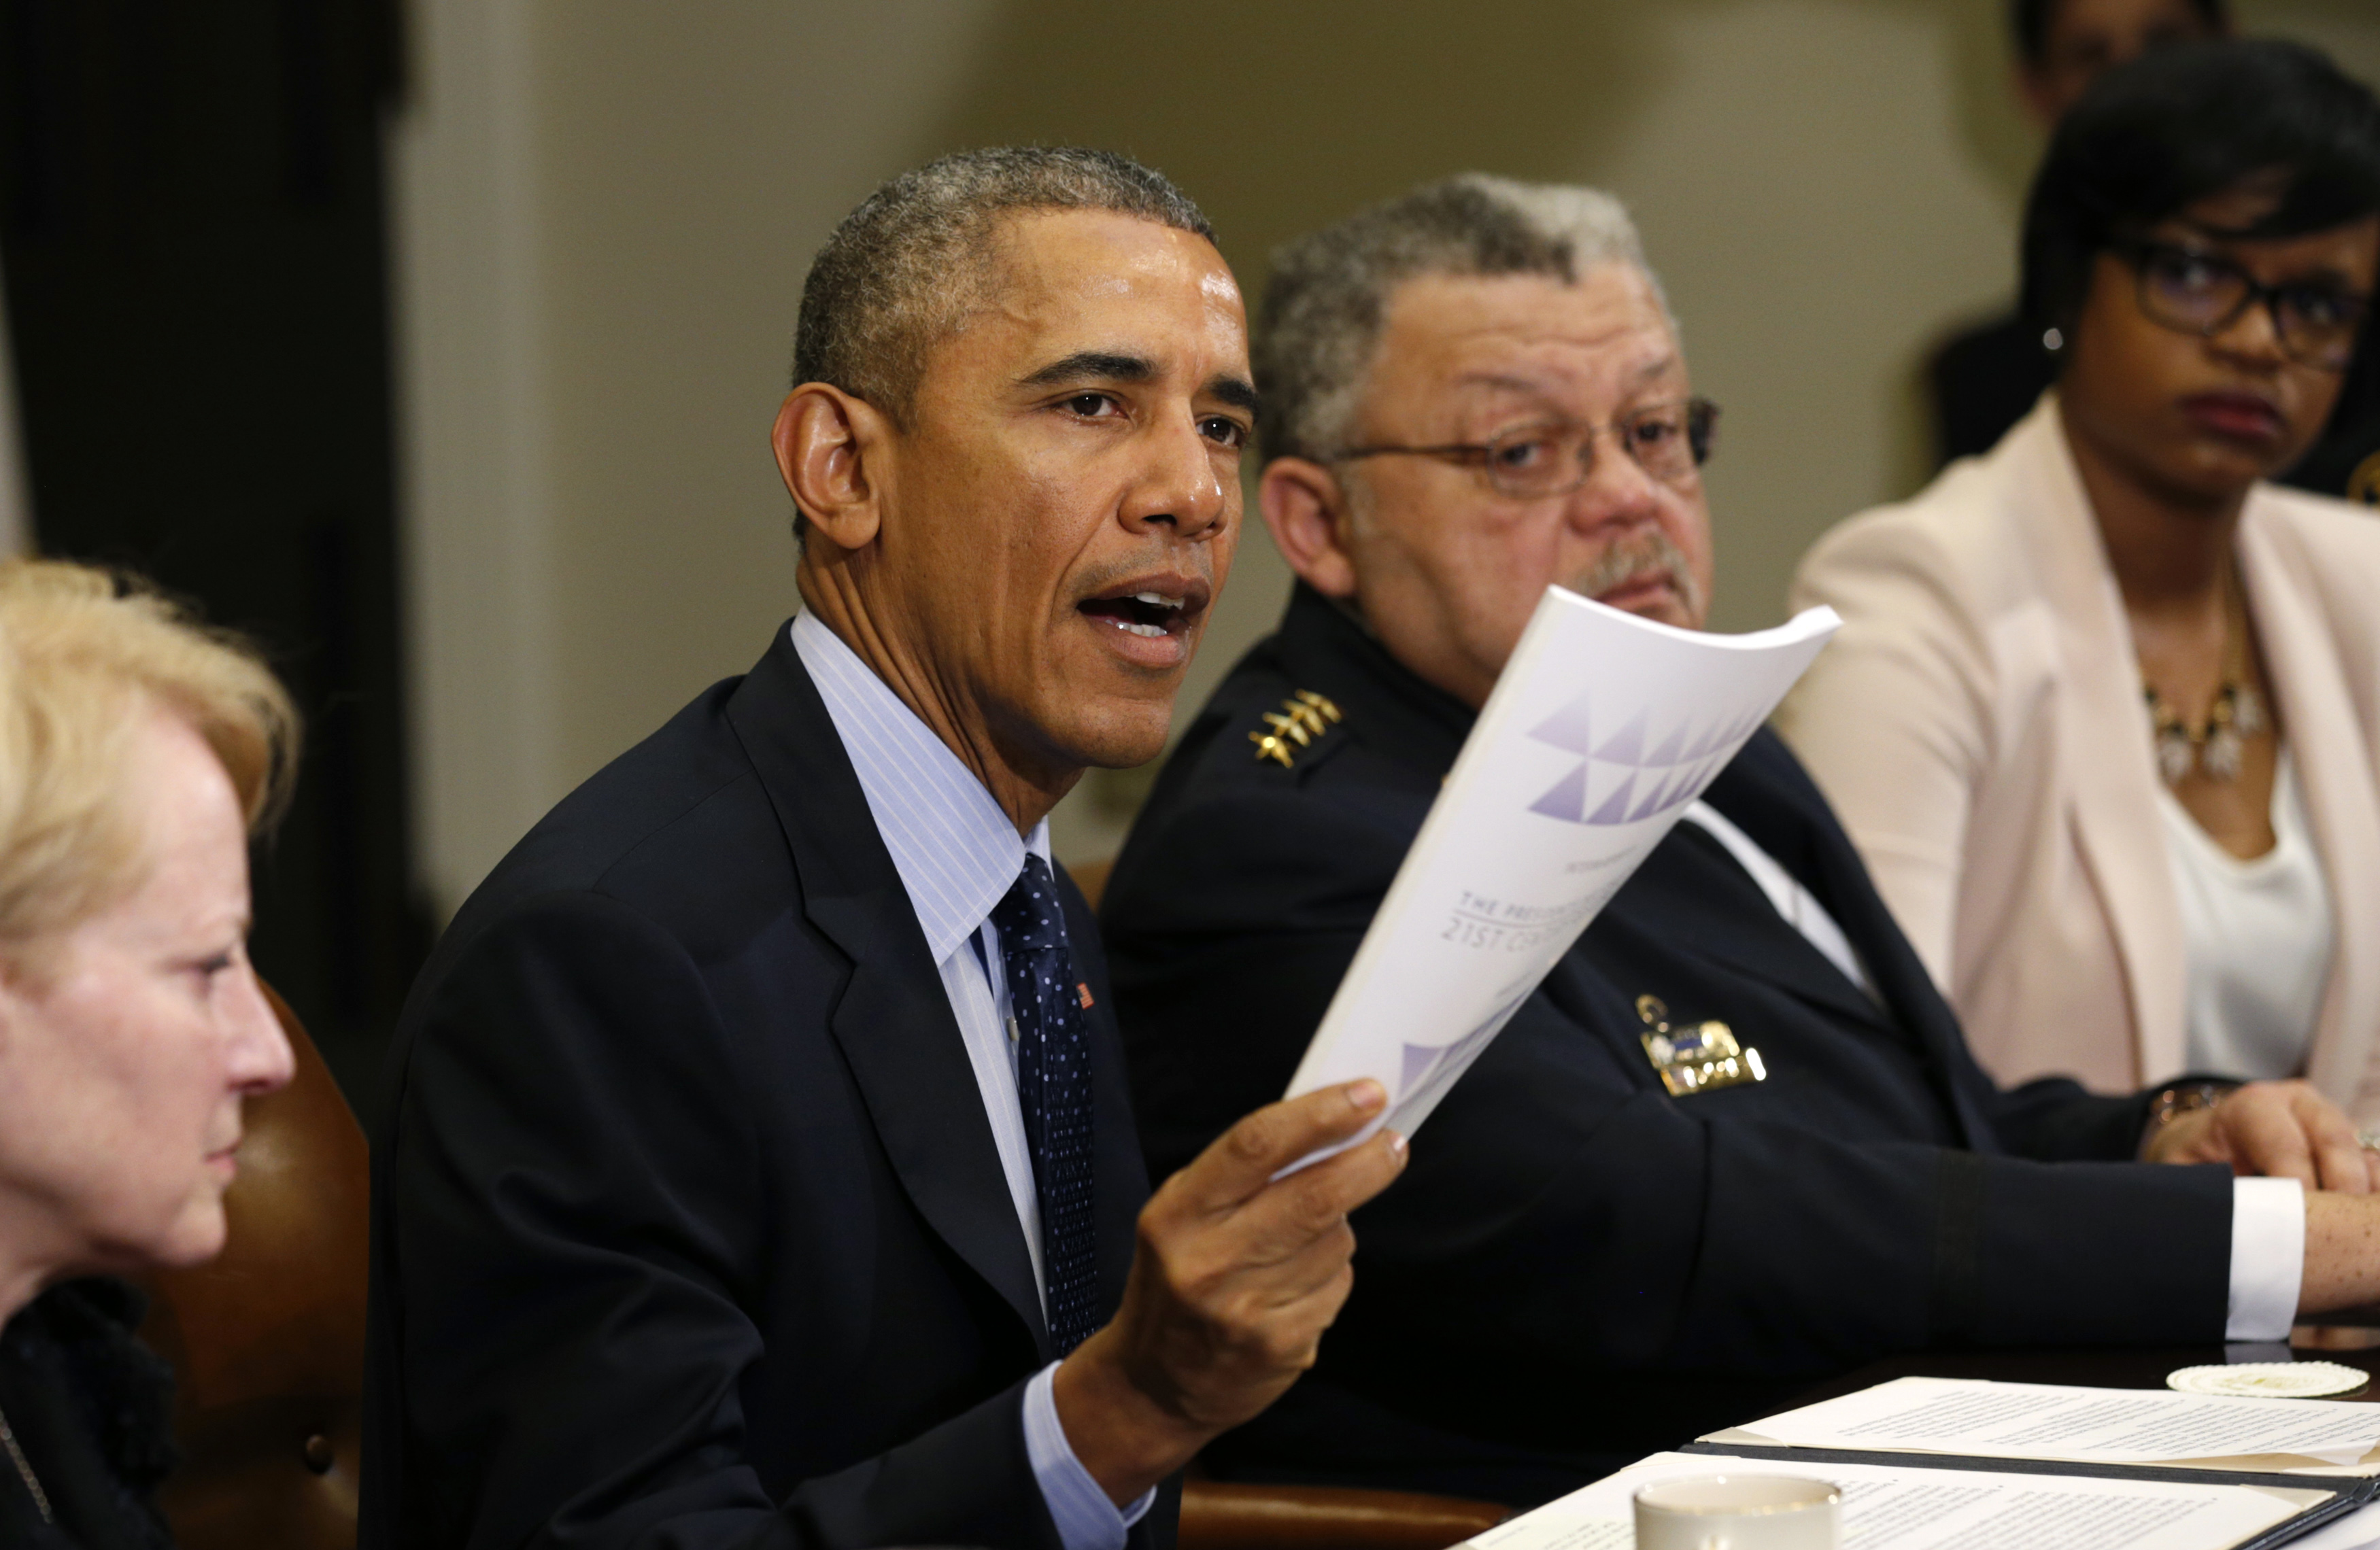 President Barack Obama holds up a copy of the report by the Task Force on 21st Century Policing at the White House in Washington, March 2, 2015. (Kevin Lamarque—Reuters)